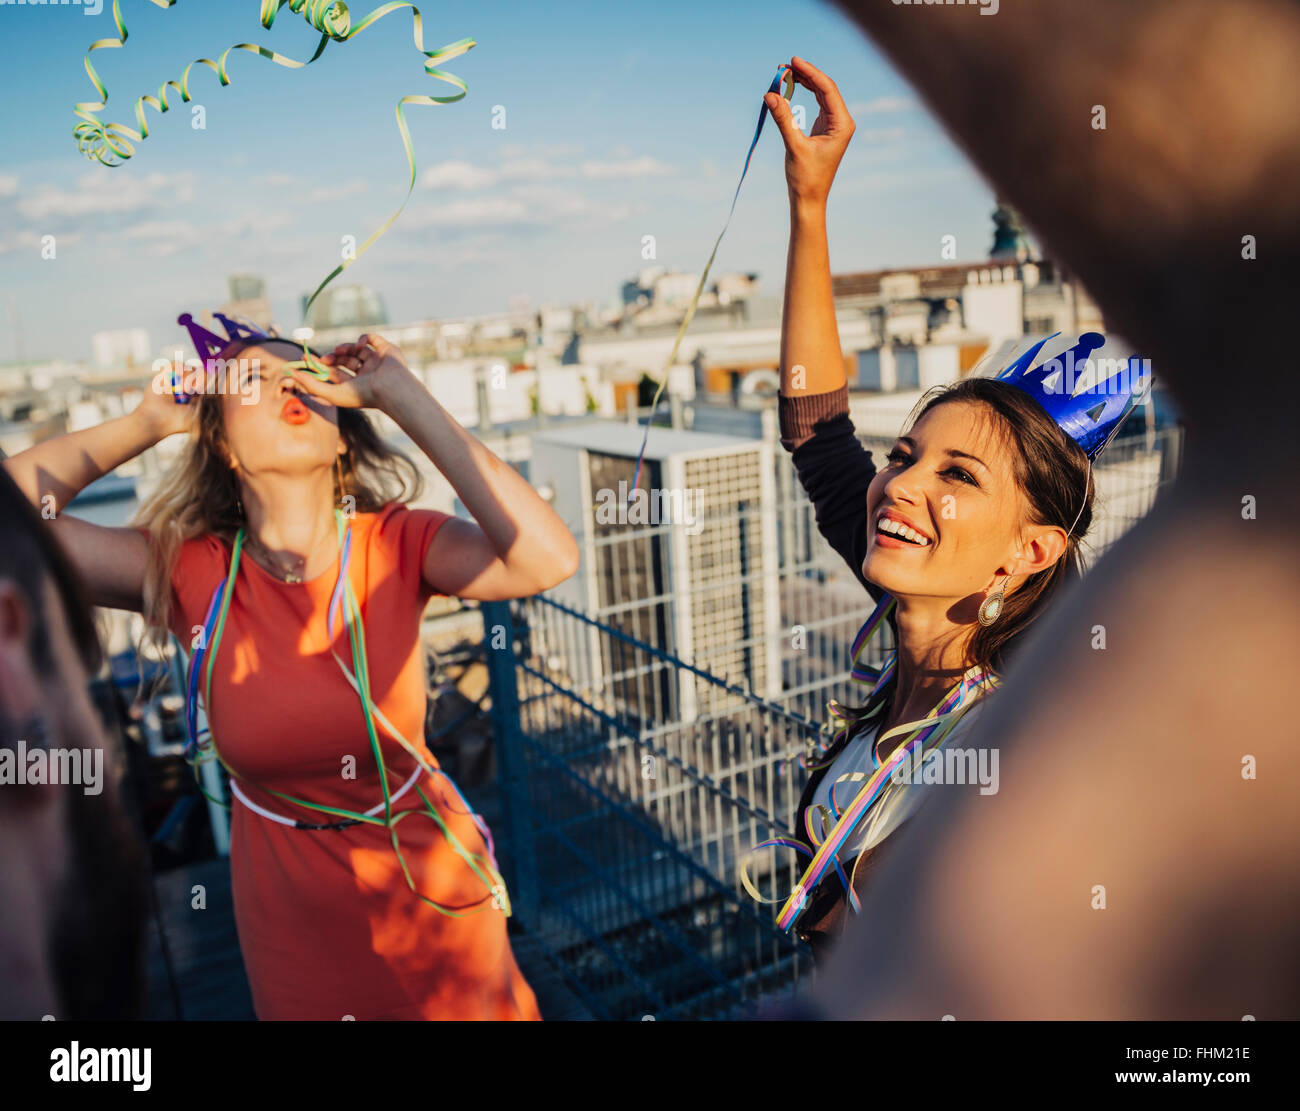 Austria, Vienna, Young people having a party on rooftop terrace Stock Photo